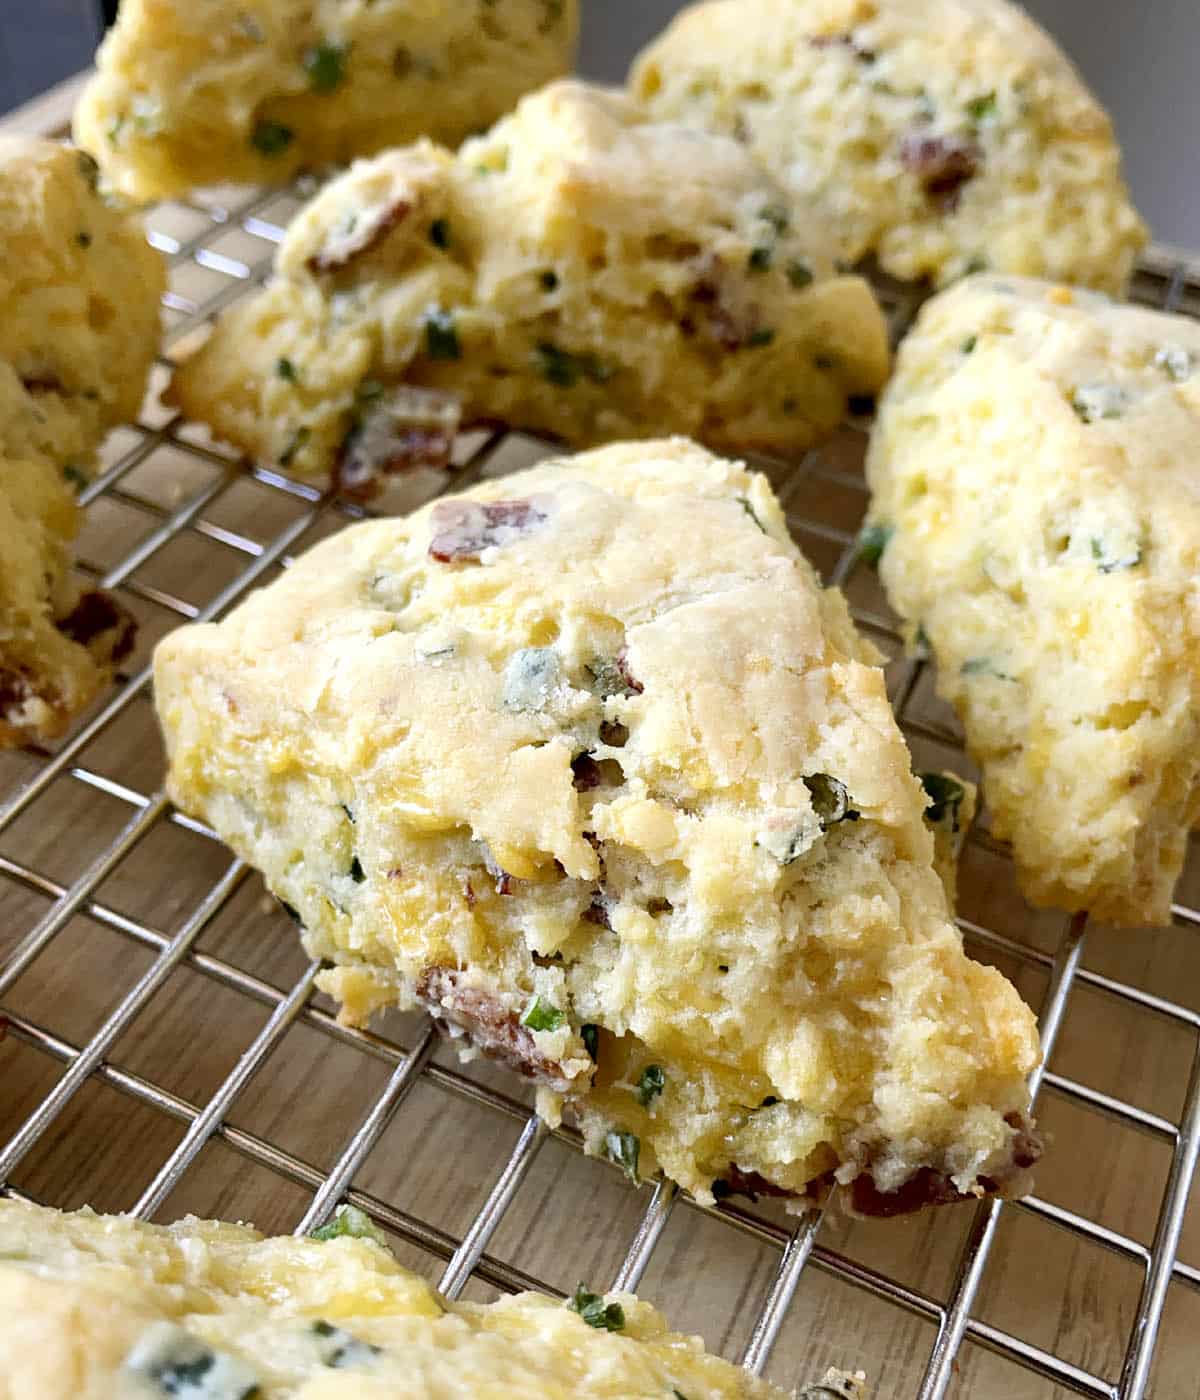 Close-up of a bacon cheddar scallion scone on a metal rack.